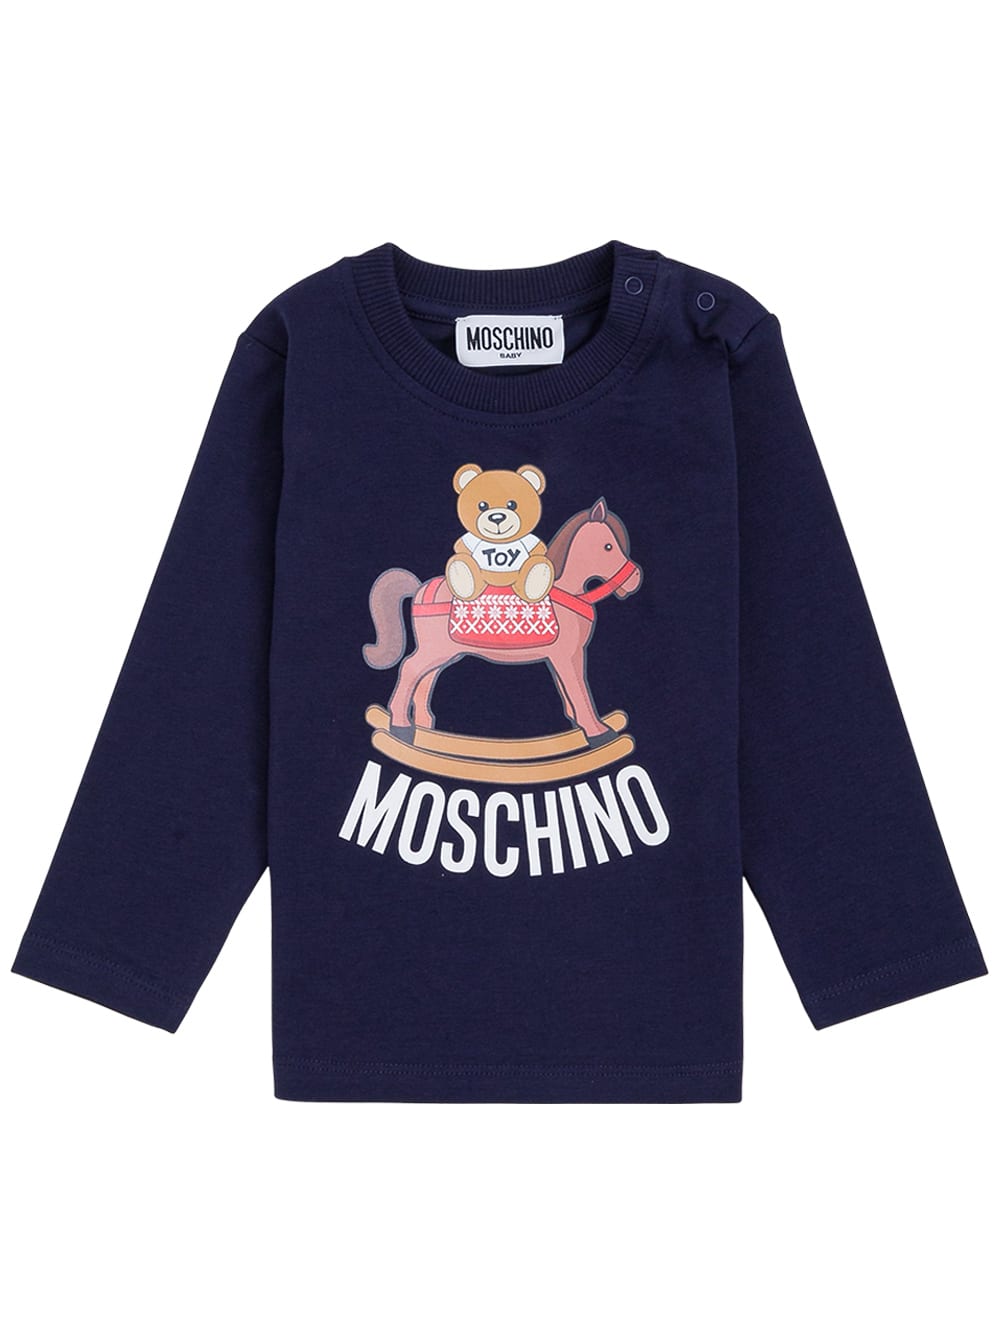 Moschino Long-sleeved T-shirt In Blue Cotton With Teddy Bear Print